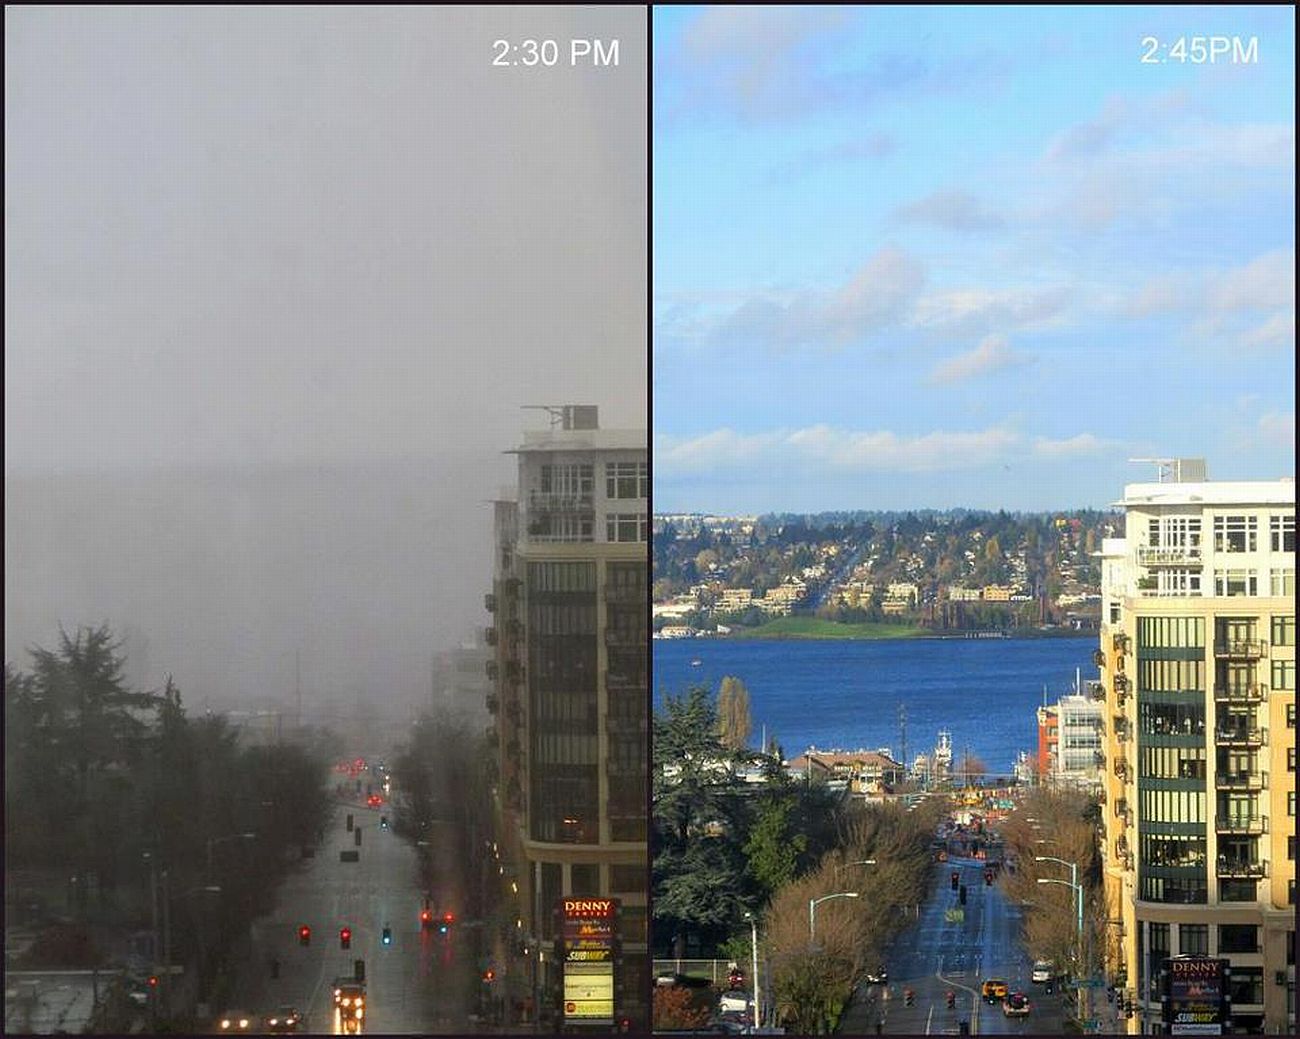 seattle weather - Pm Denny